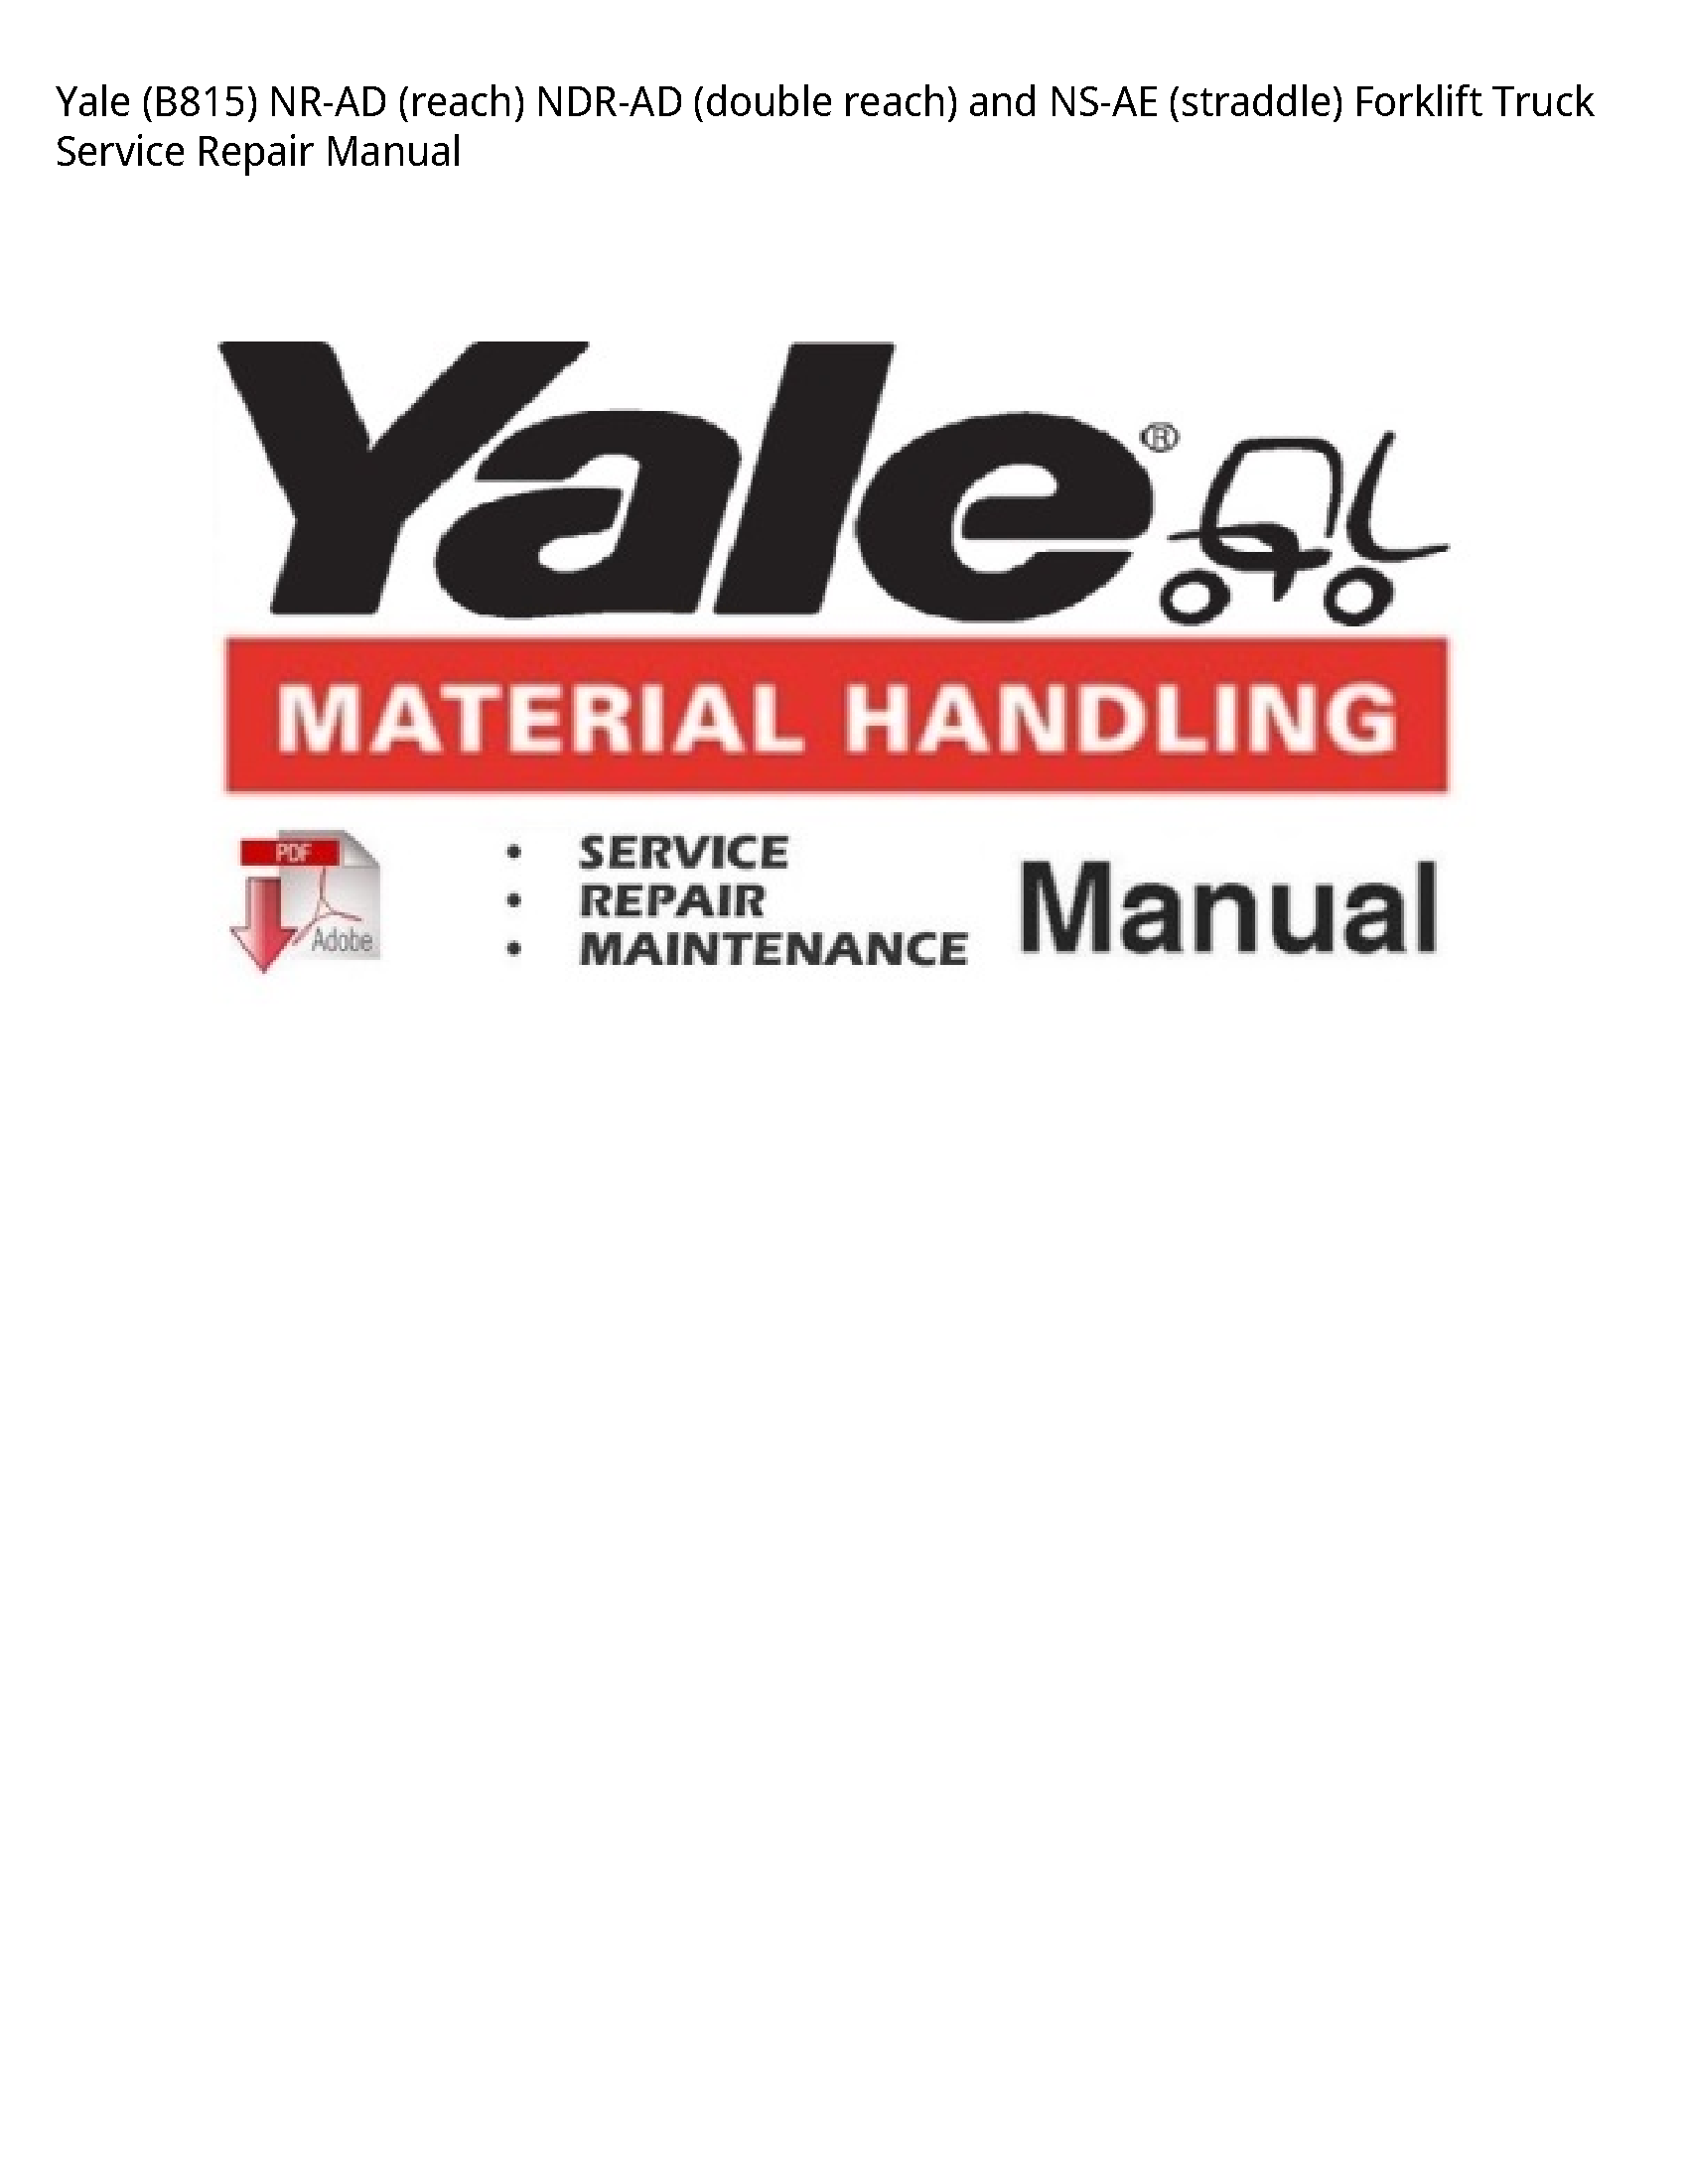 Yale (B815) NR-AD (reach) NDR-AD (double reach)  NS-AE (straddle) Forklift Truck manual